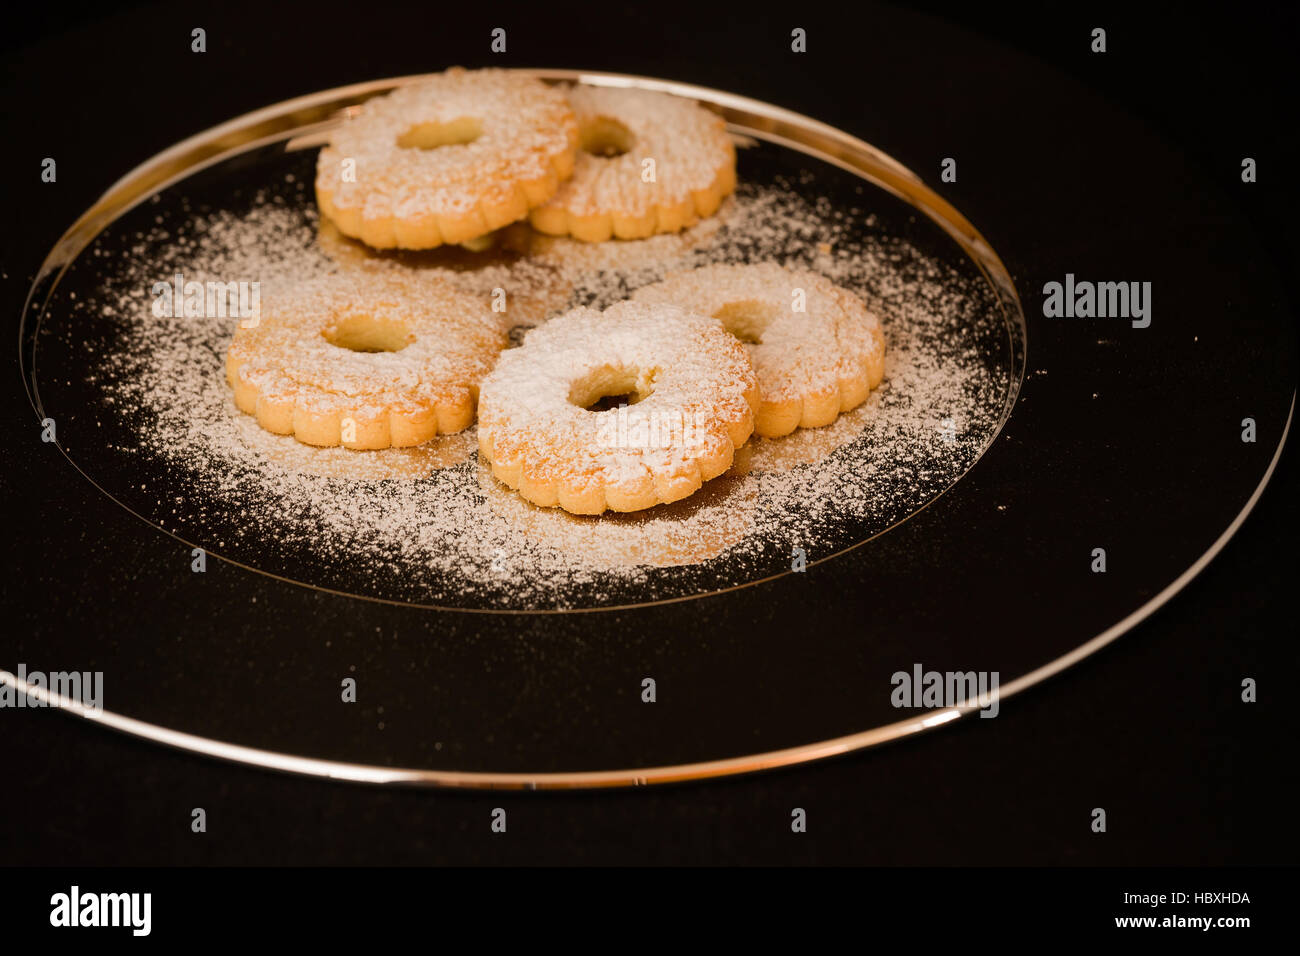 Biscuits canestrelli on a plate of steel Stock Photo